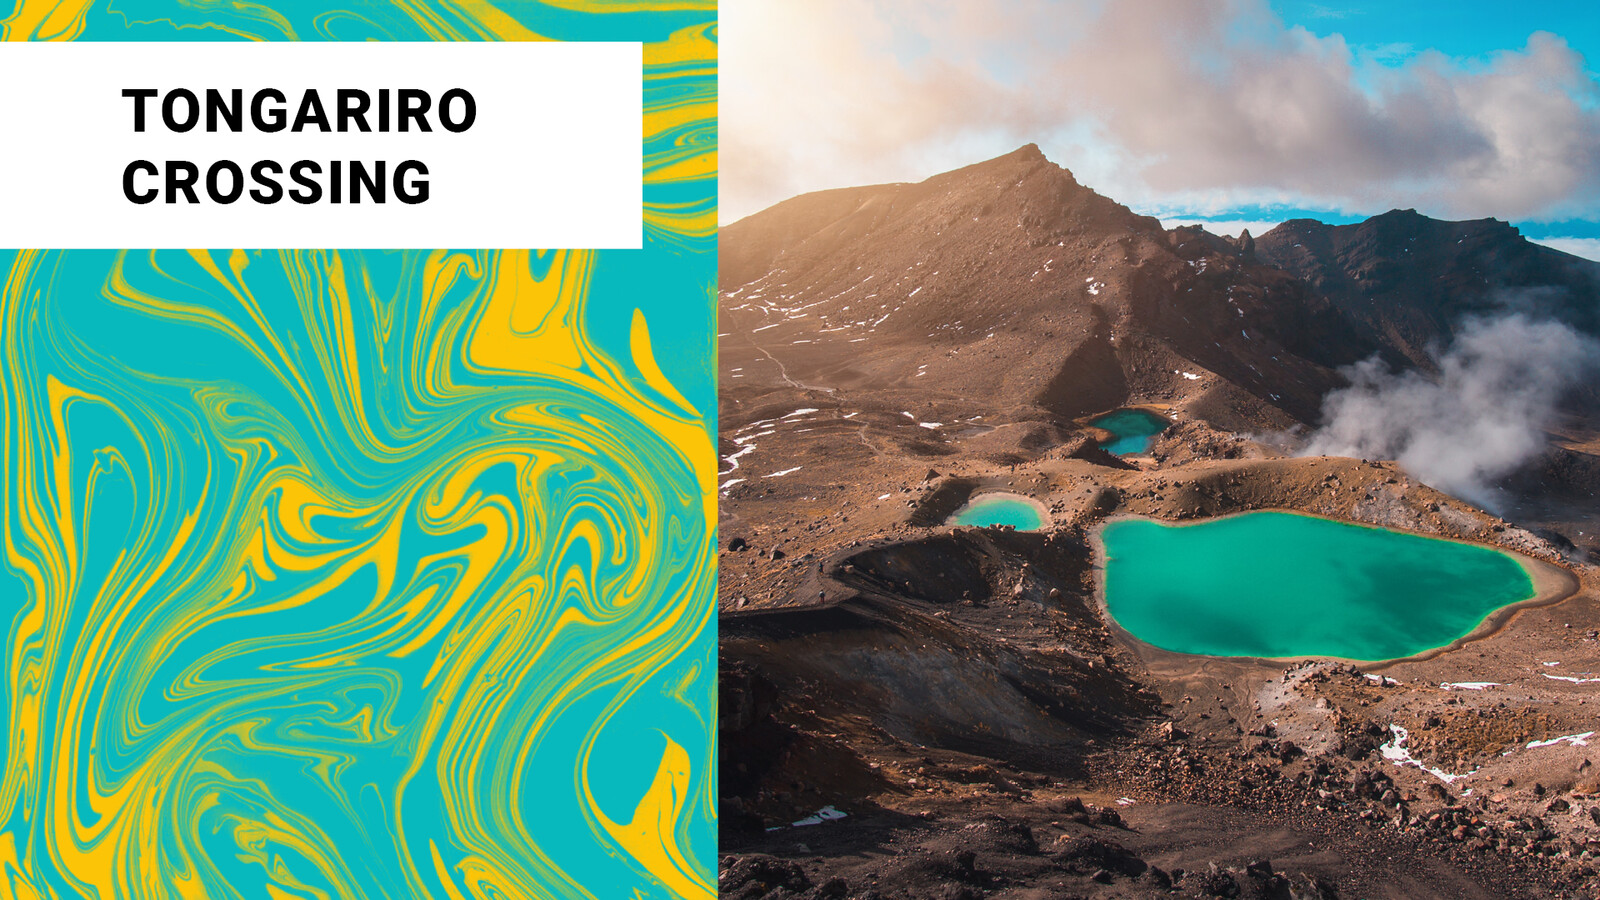 This myth is about 6 male mountains who fought to win the only female mountain, Pihanga. They fought fiercely with violent eruptions for days. In the end, Tongariro was the victor. The defeated warrior mountains were given the night to move away.